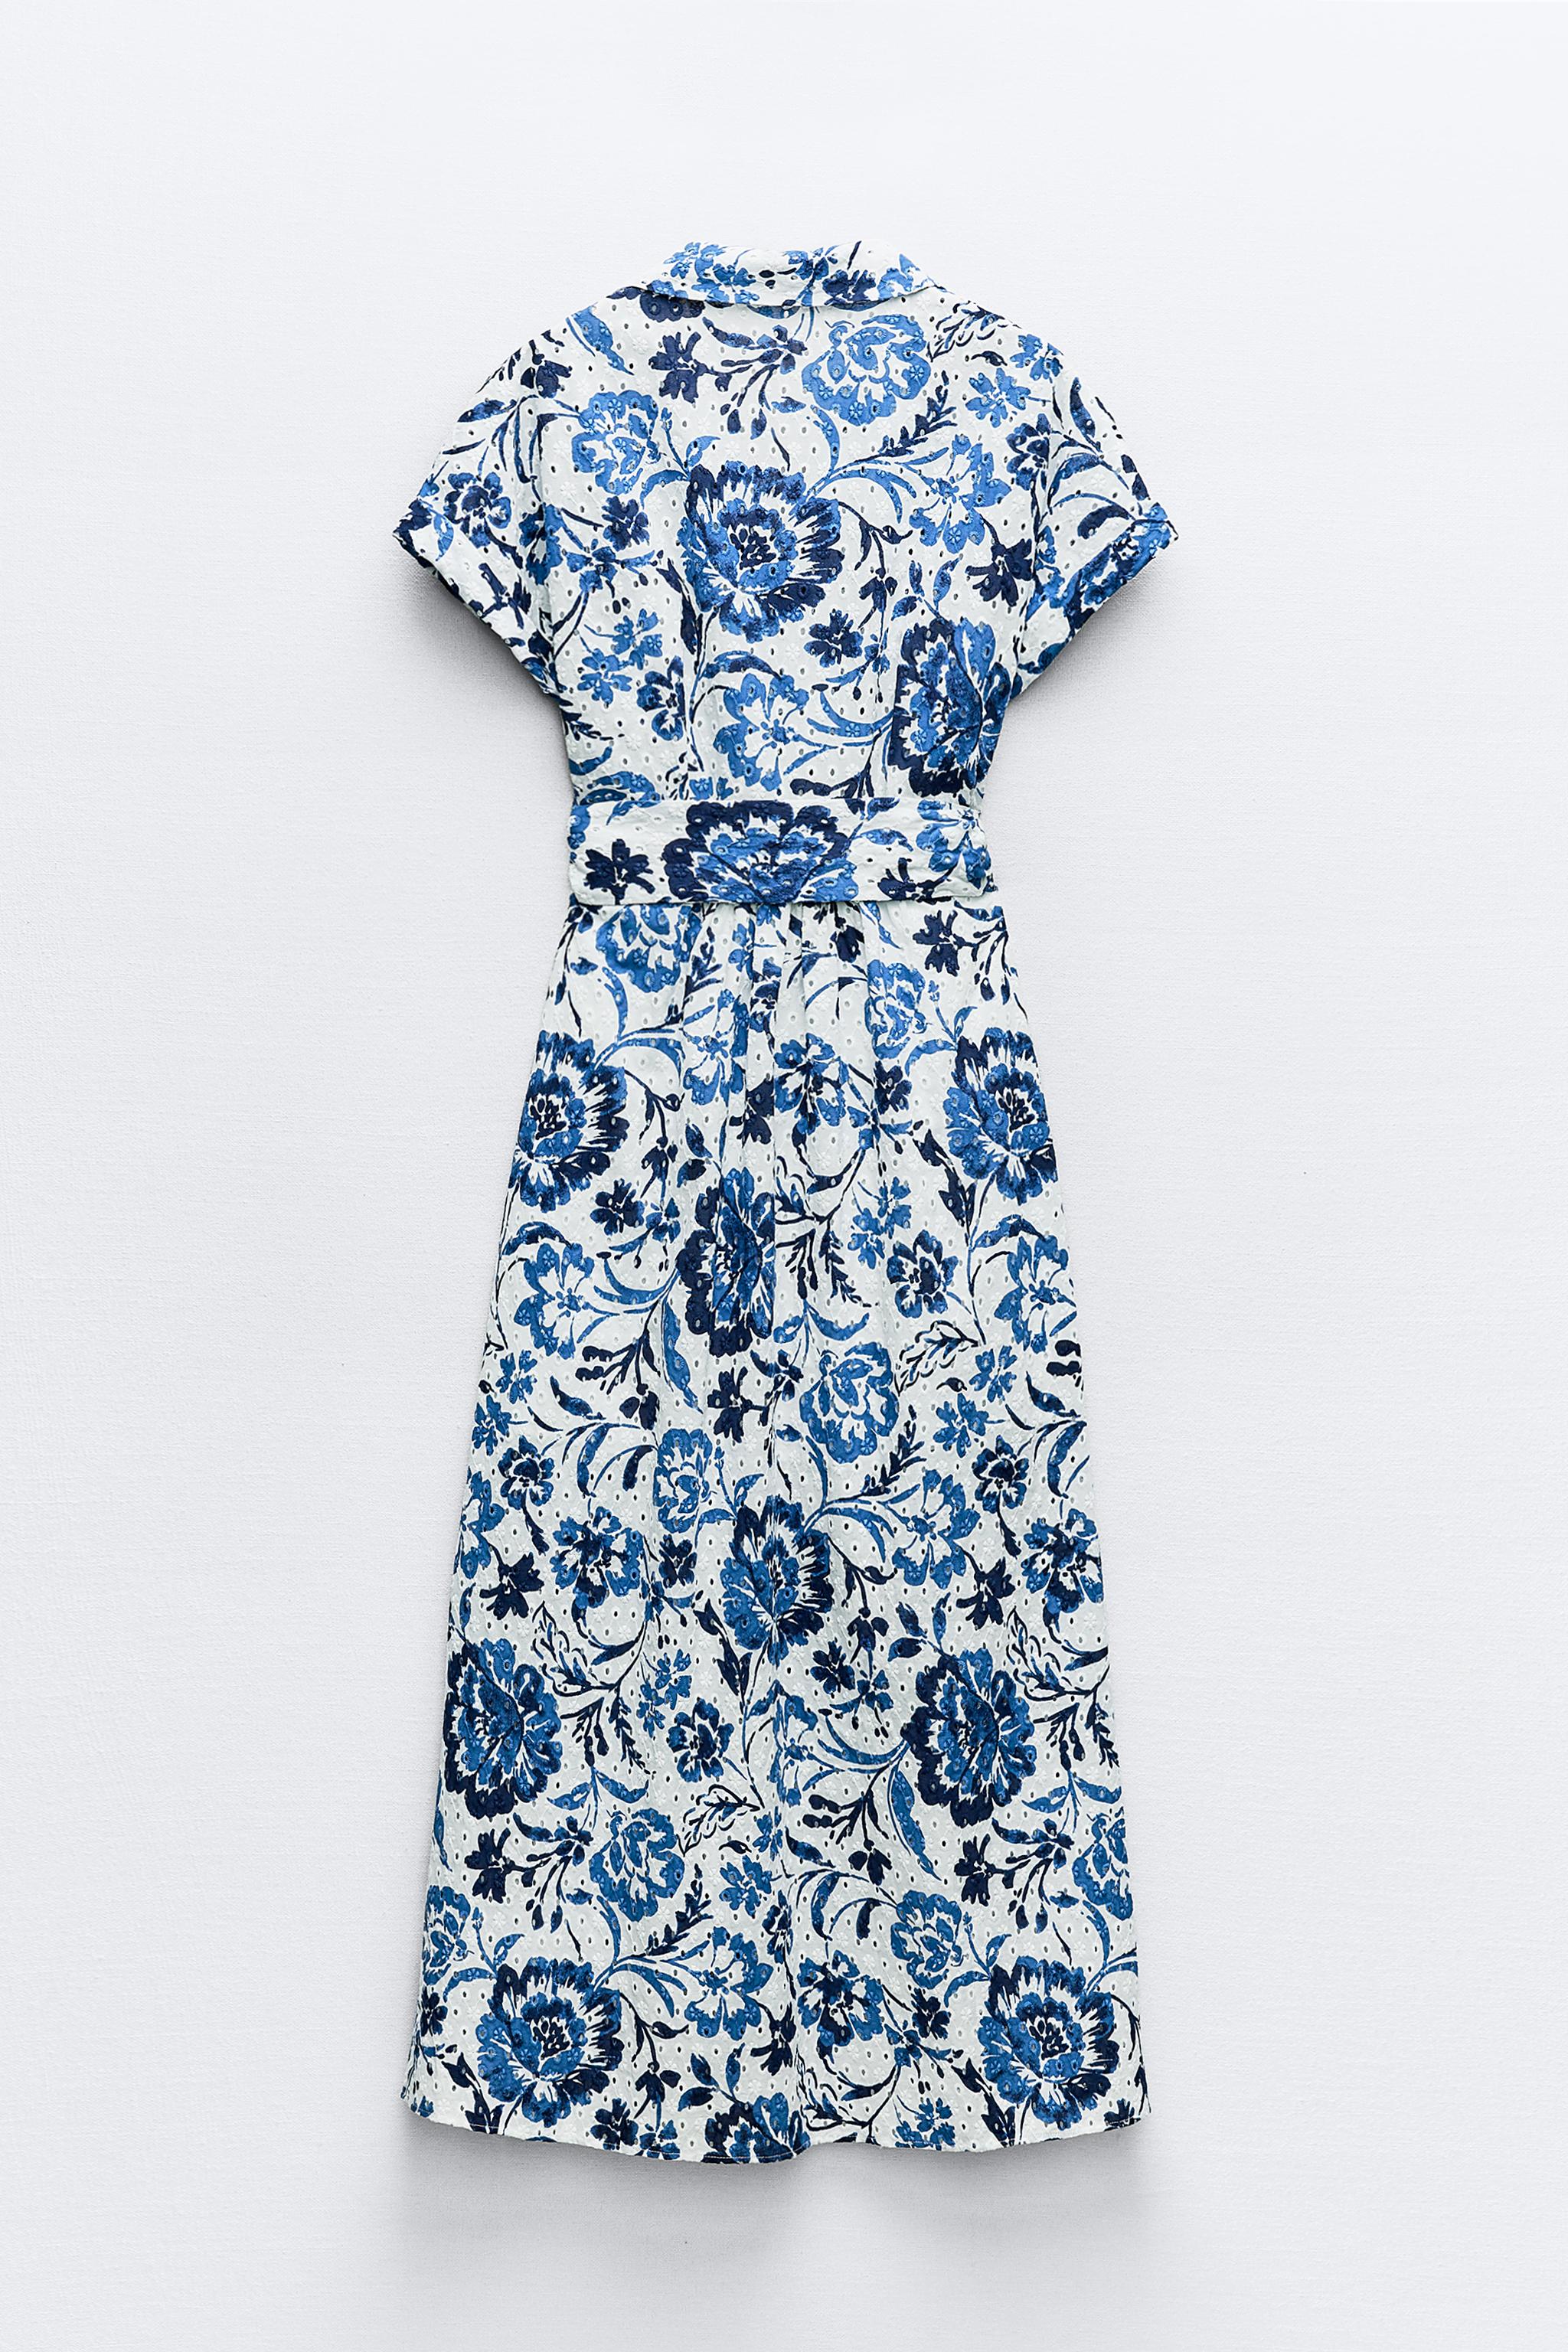 PRINTED DRESS WITH OPENWORK EMBROIDERY